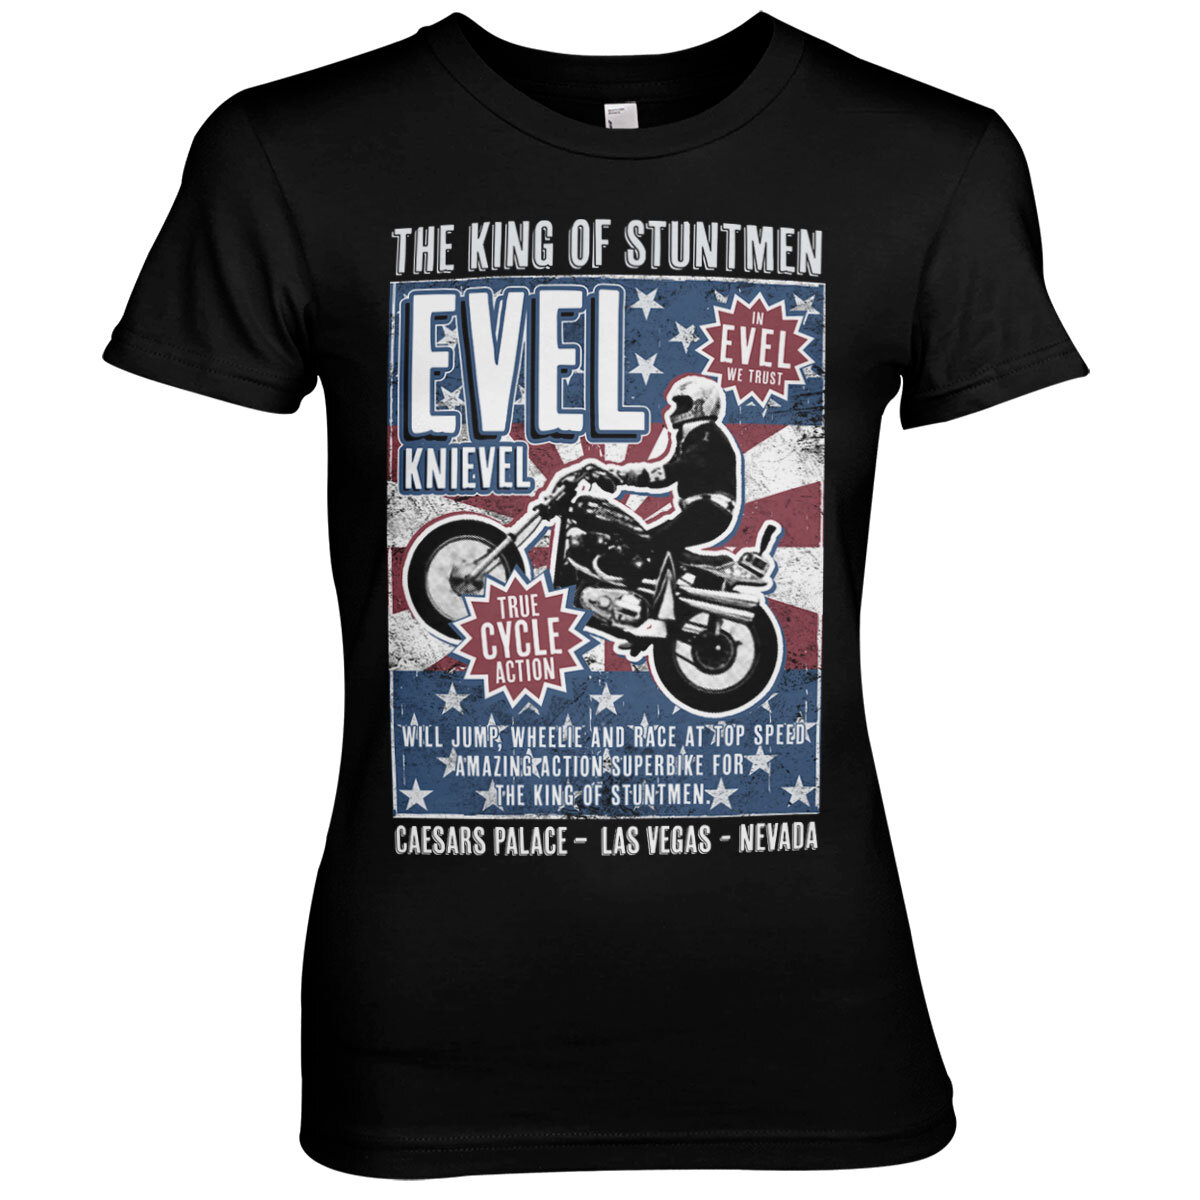 Evel Knievel Poster Girly Tee